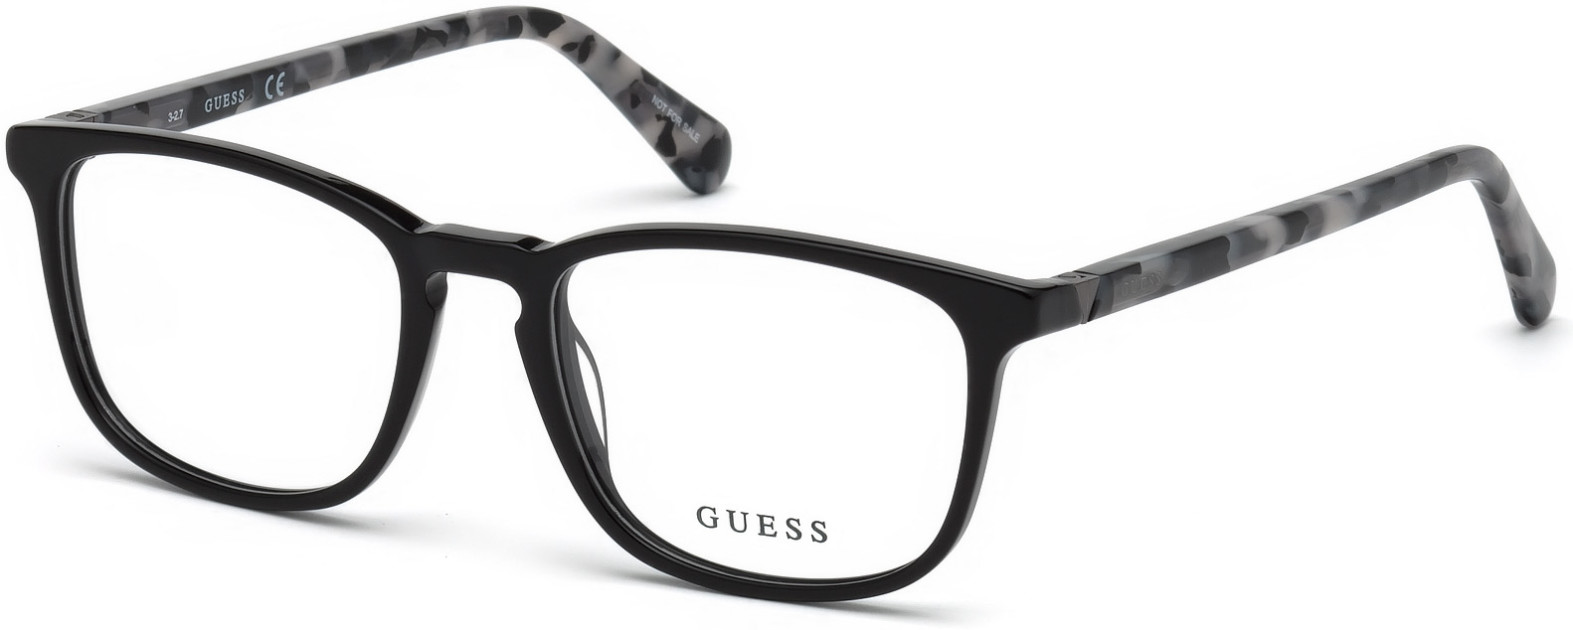 GUESS 1950 001